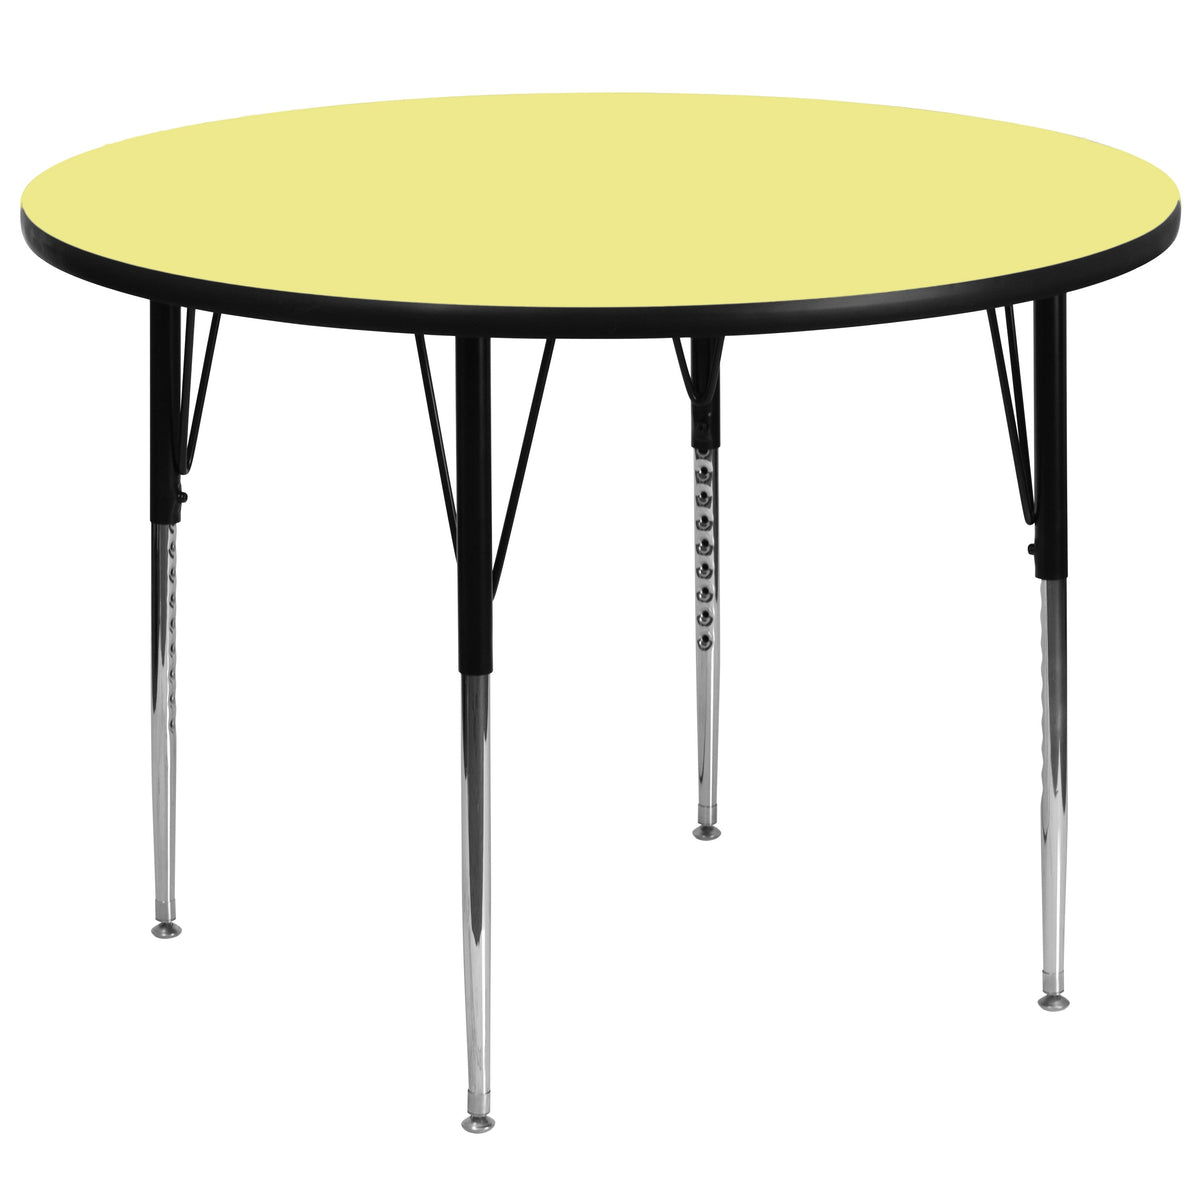 Yellow |#| 60inch Round Yellow Thermal Laminate Activity Table - Height Adjustable Legs